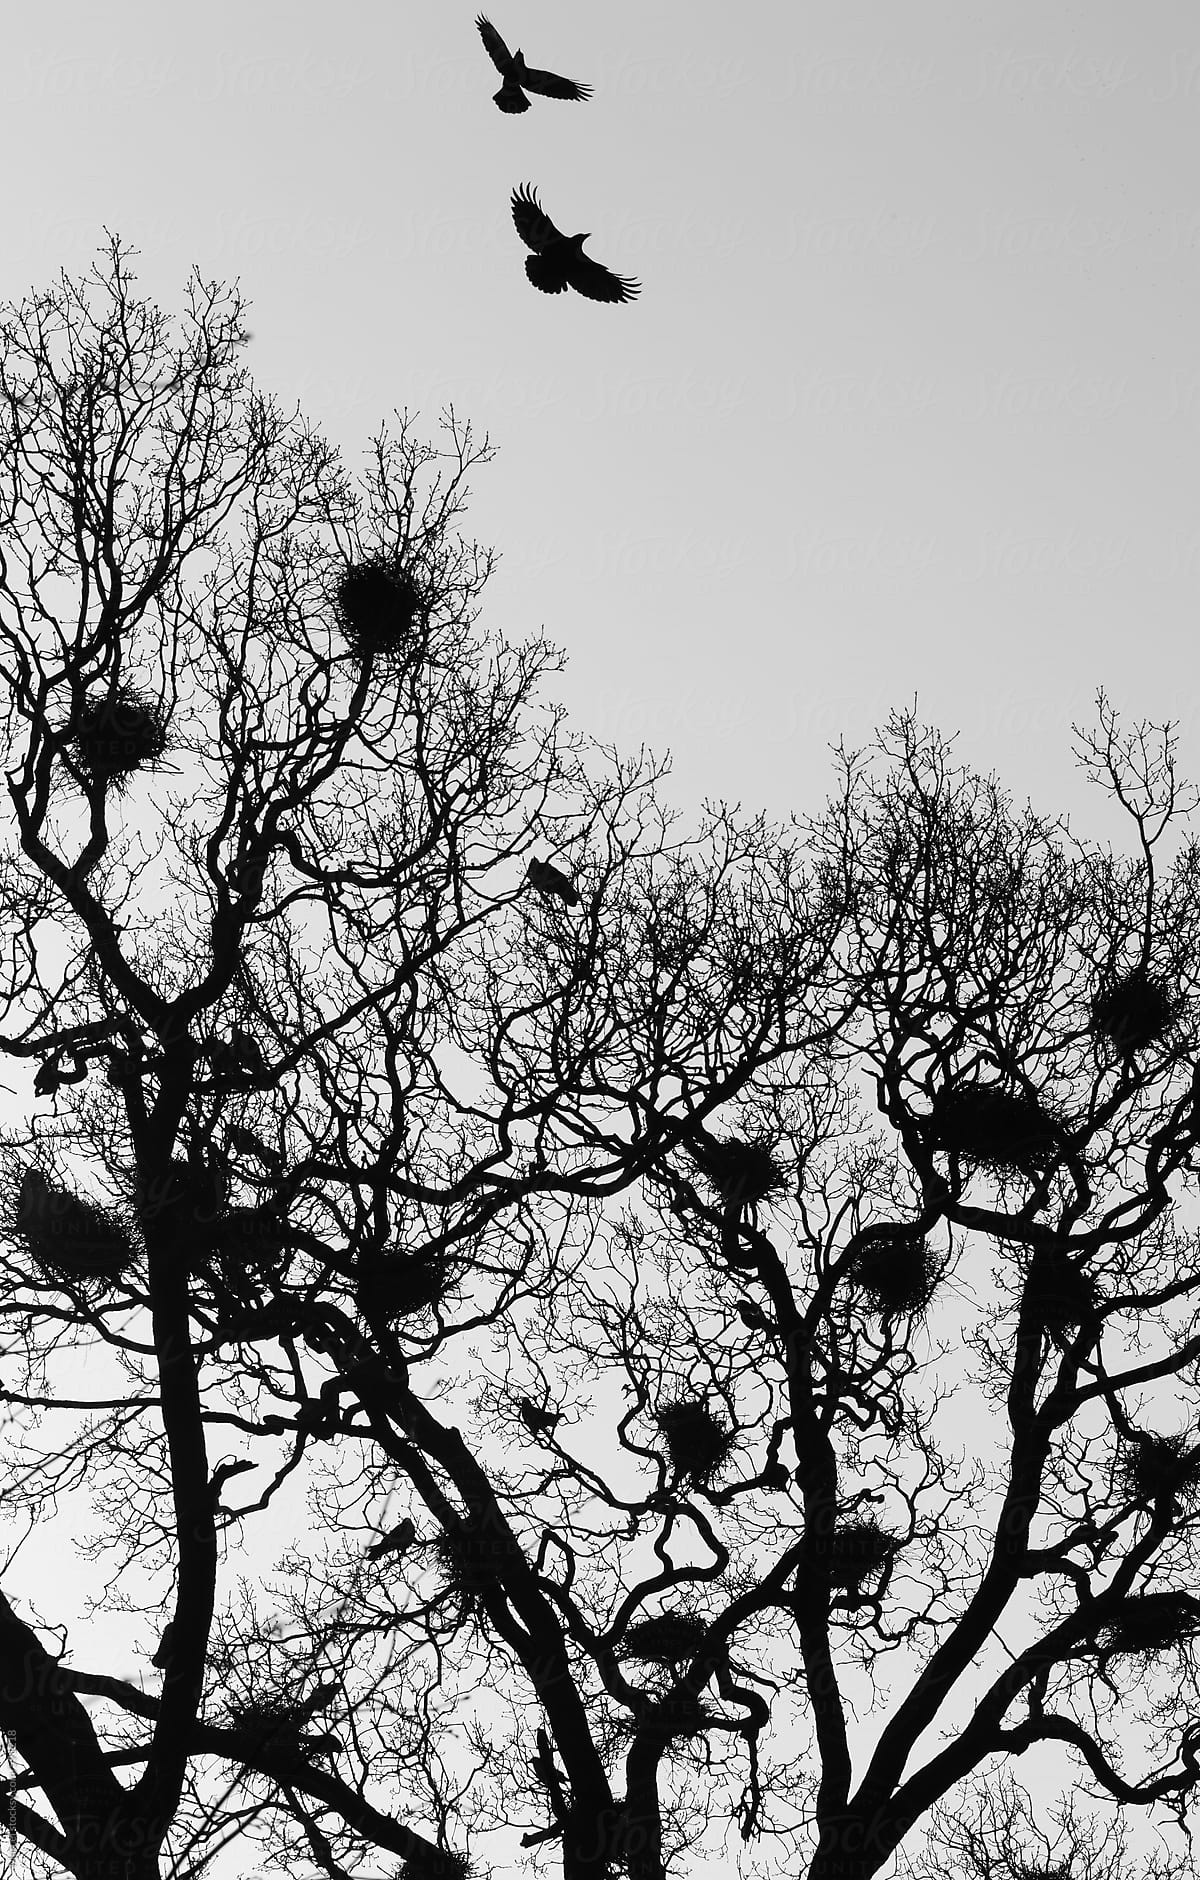 Two crows flying above a tree with nests